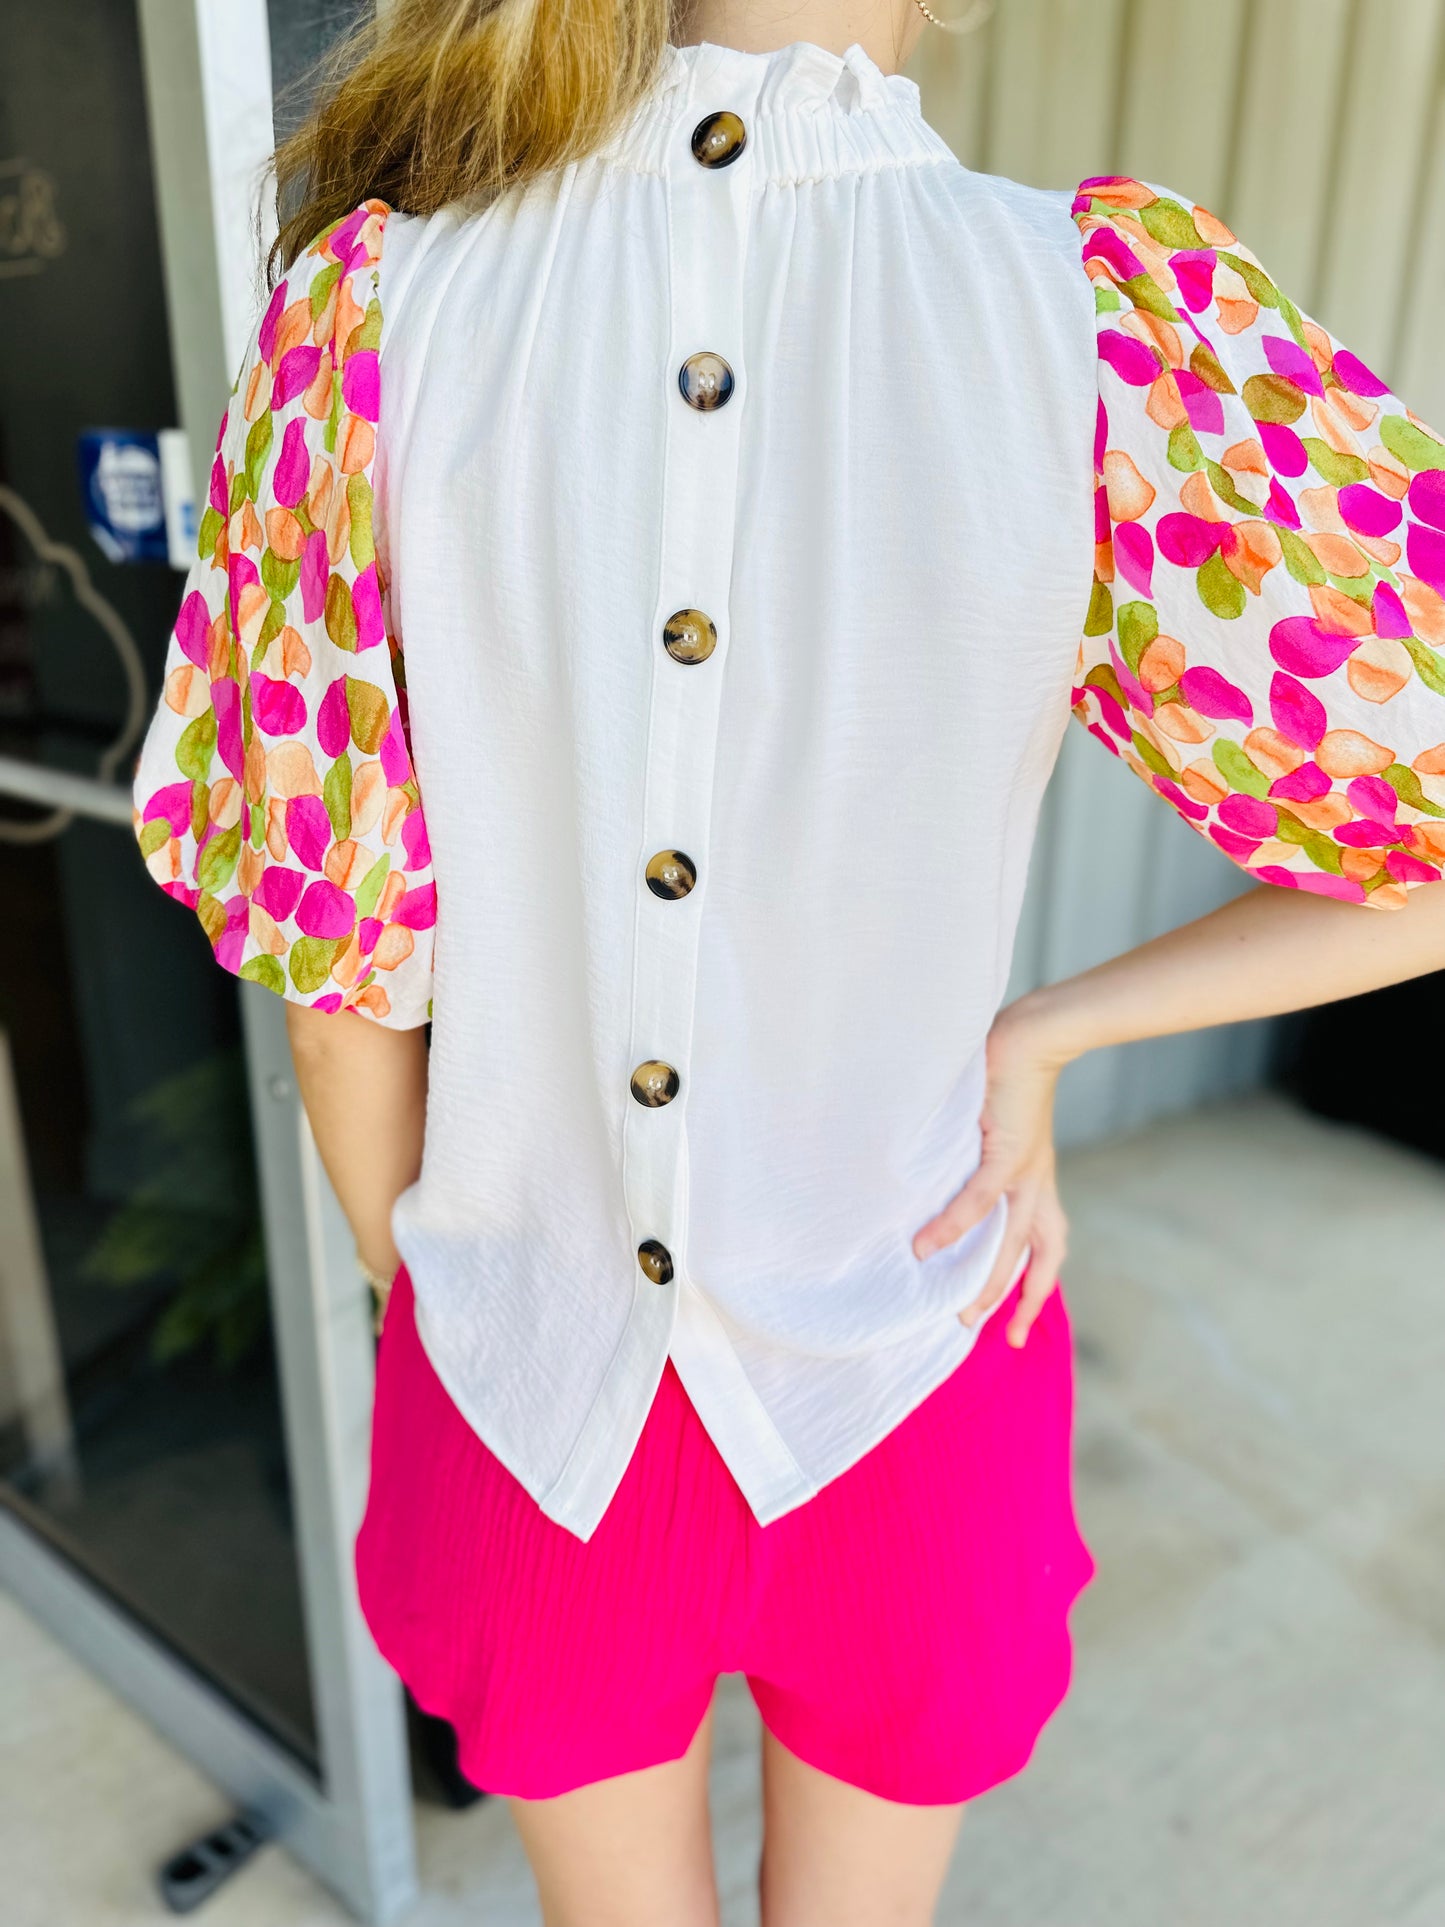 The Pixi Puff Sleeve Top